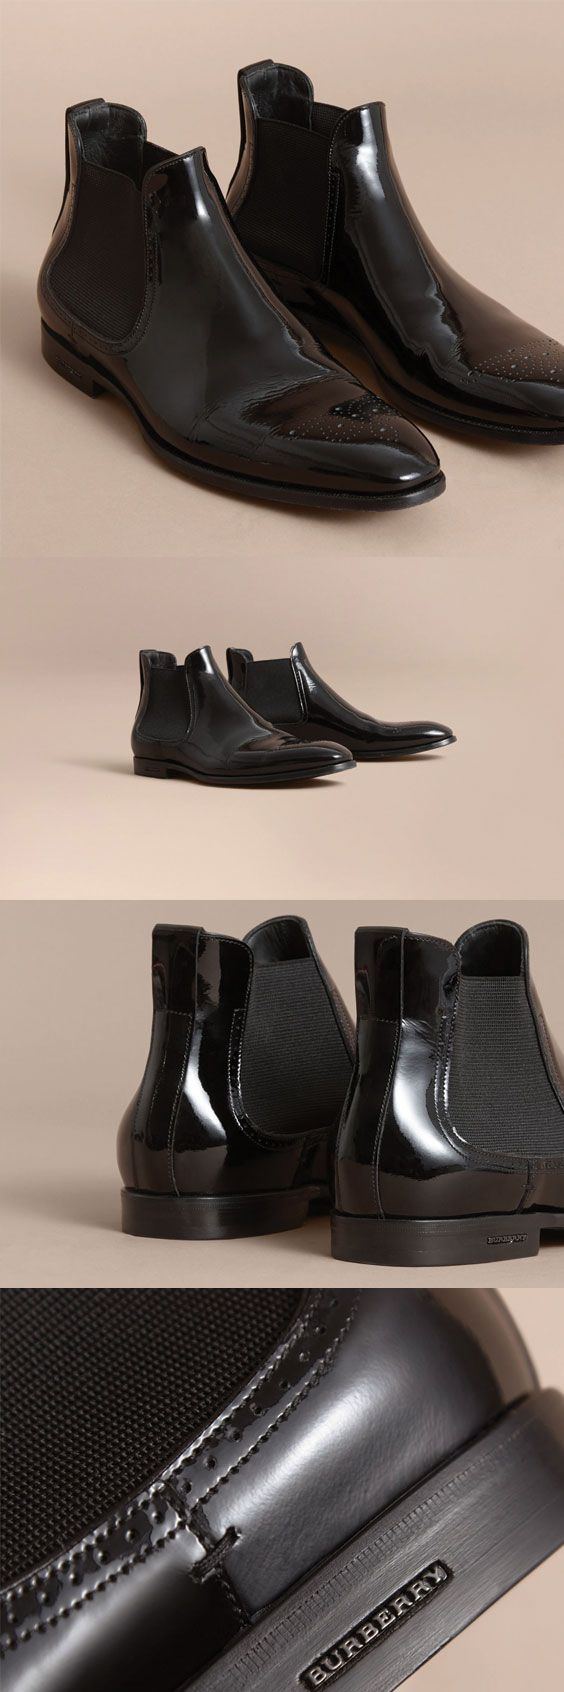 Burberry Polished Leather Chelsea Boots $695 men shoes men boots...